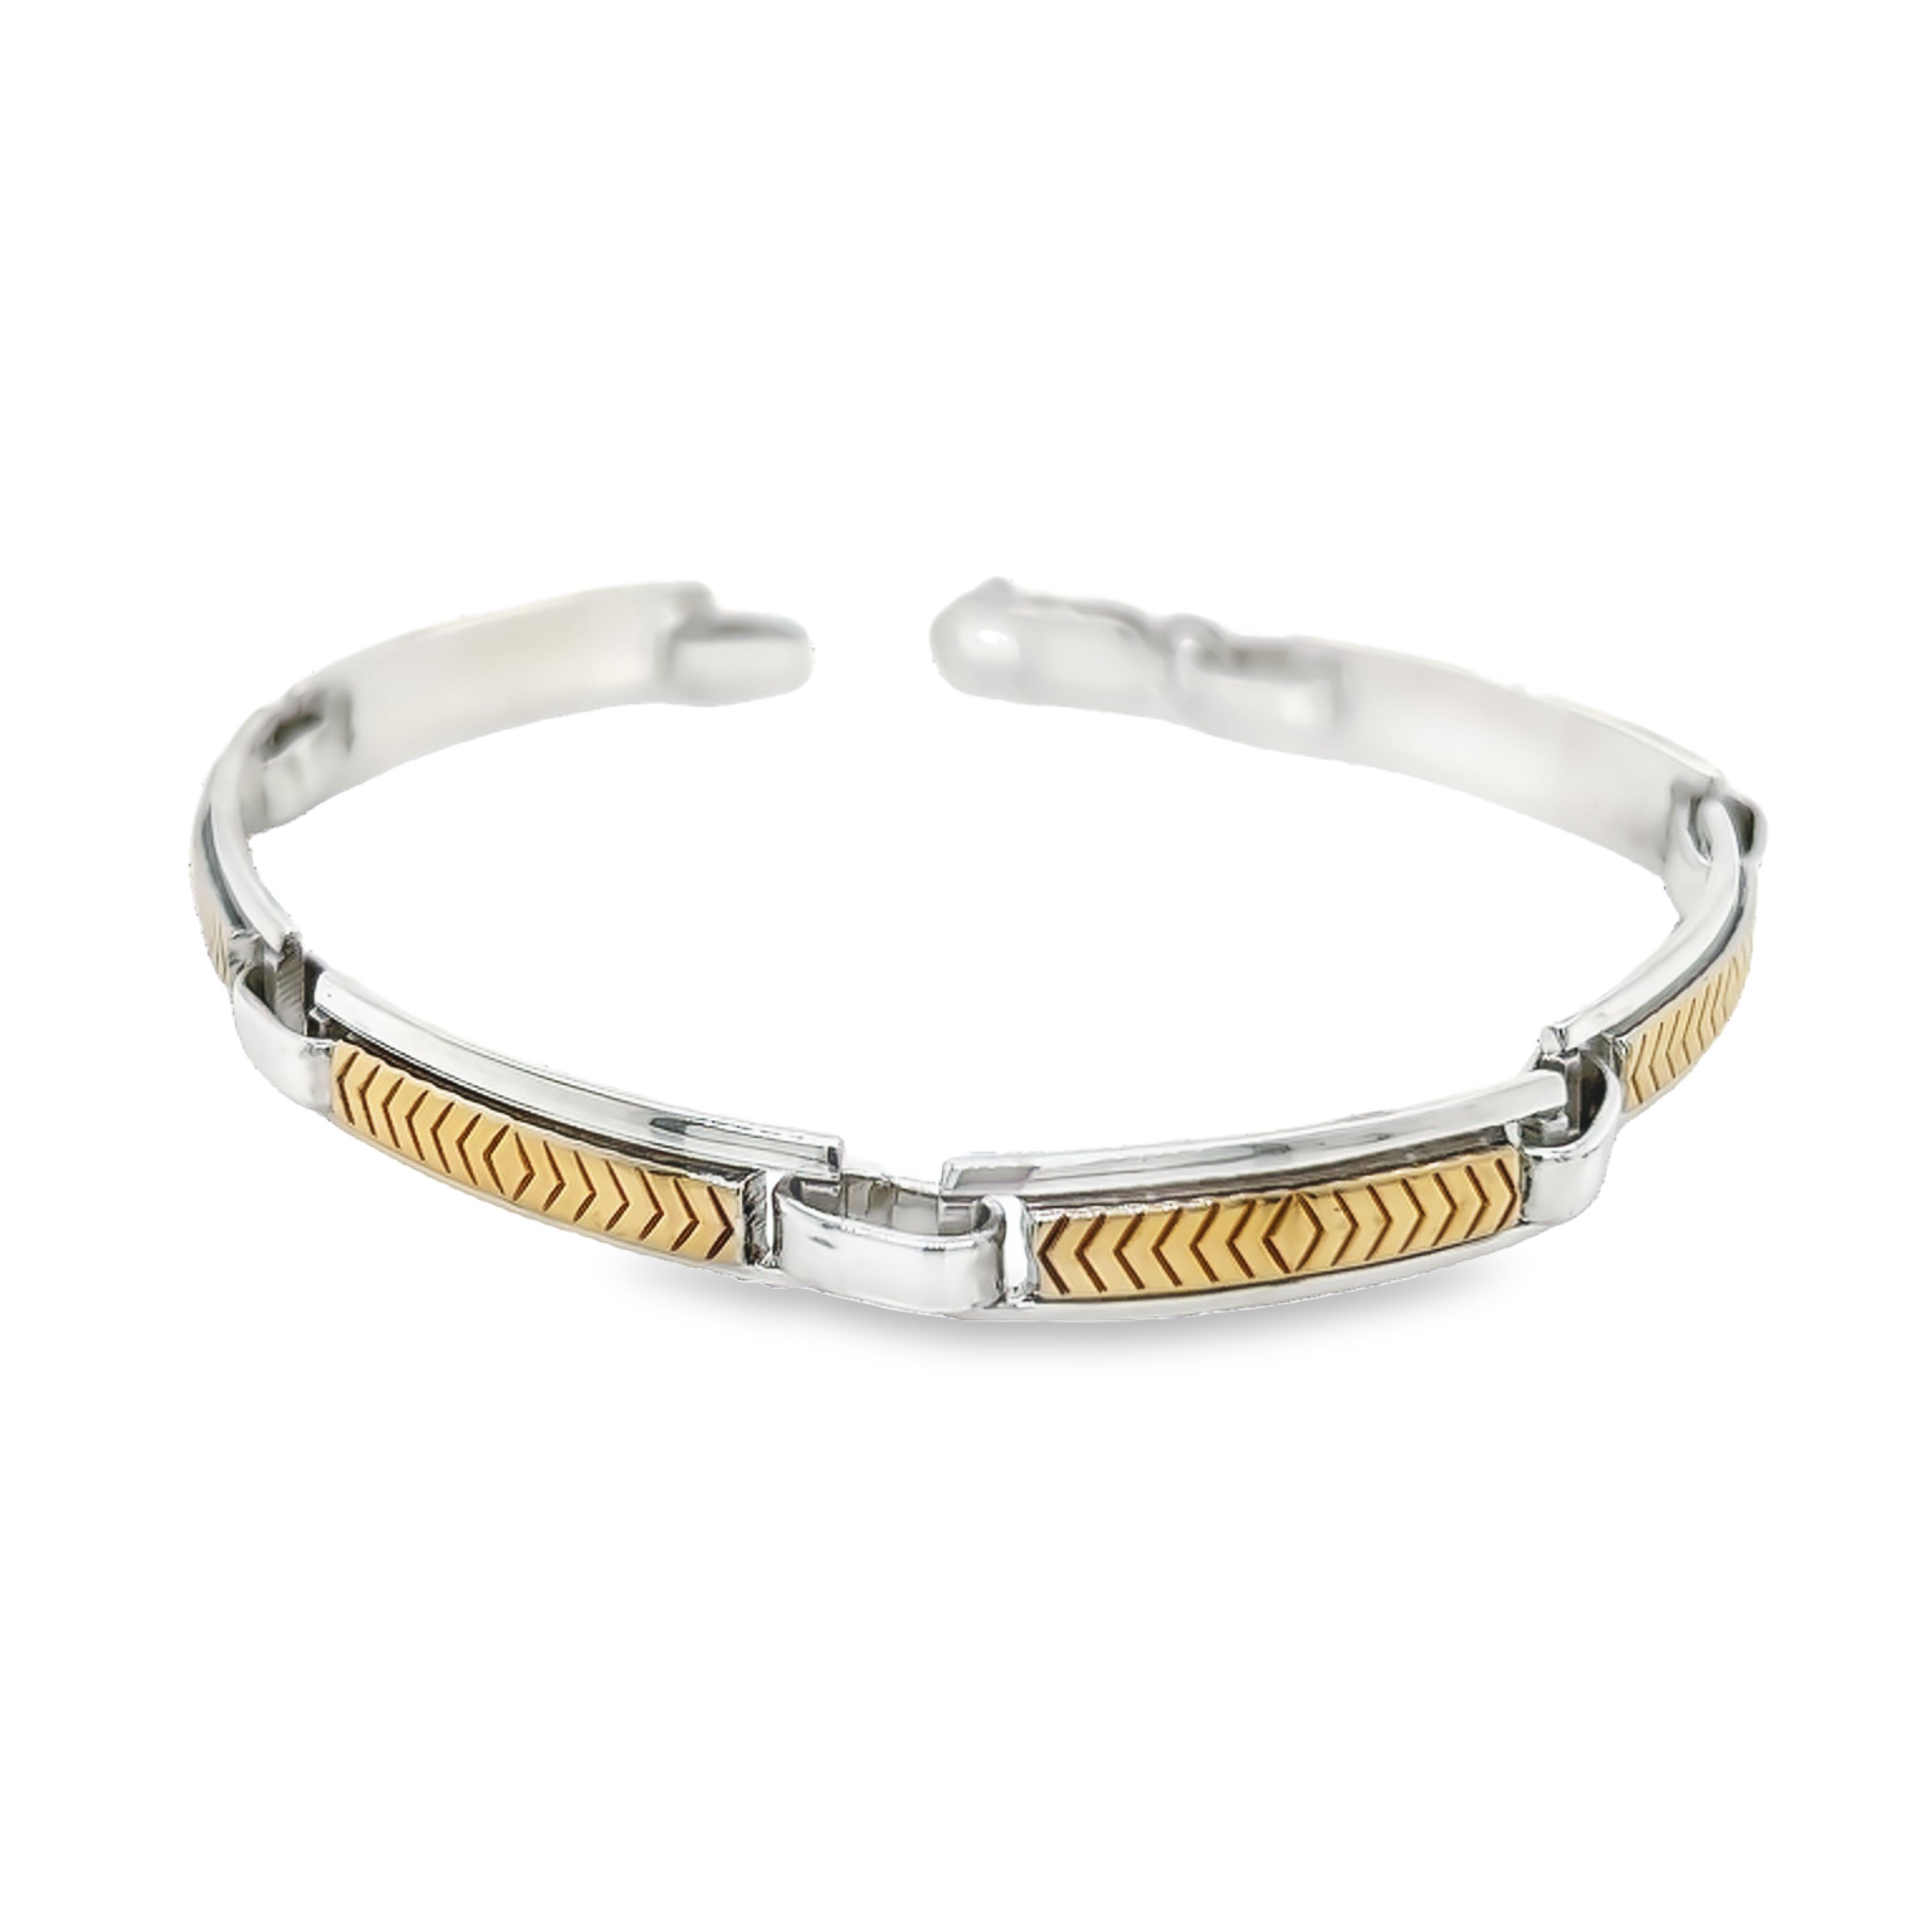 Sterling Bracelet with six 14 karat yellow capped links.